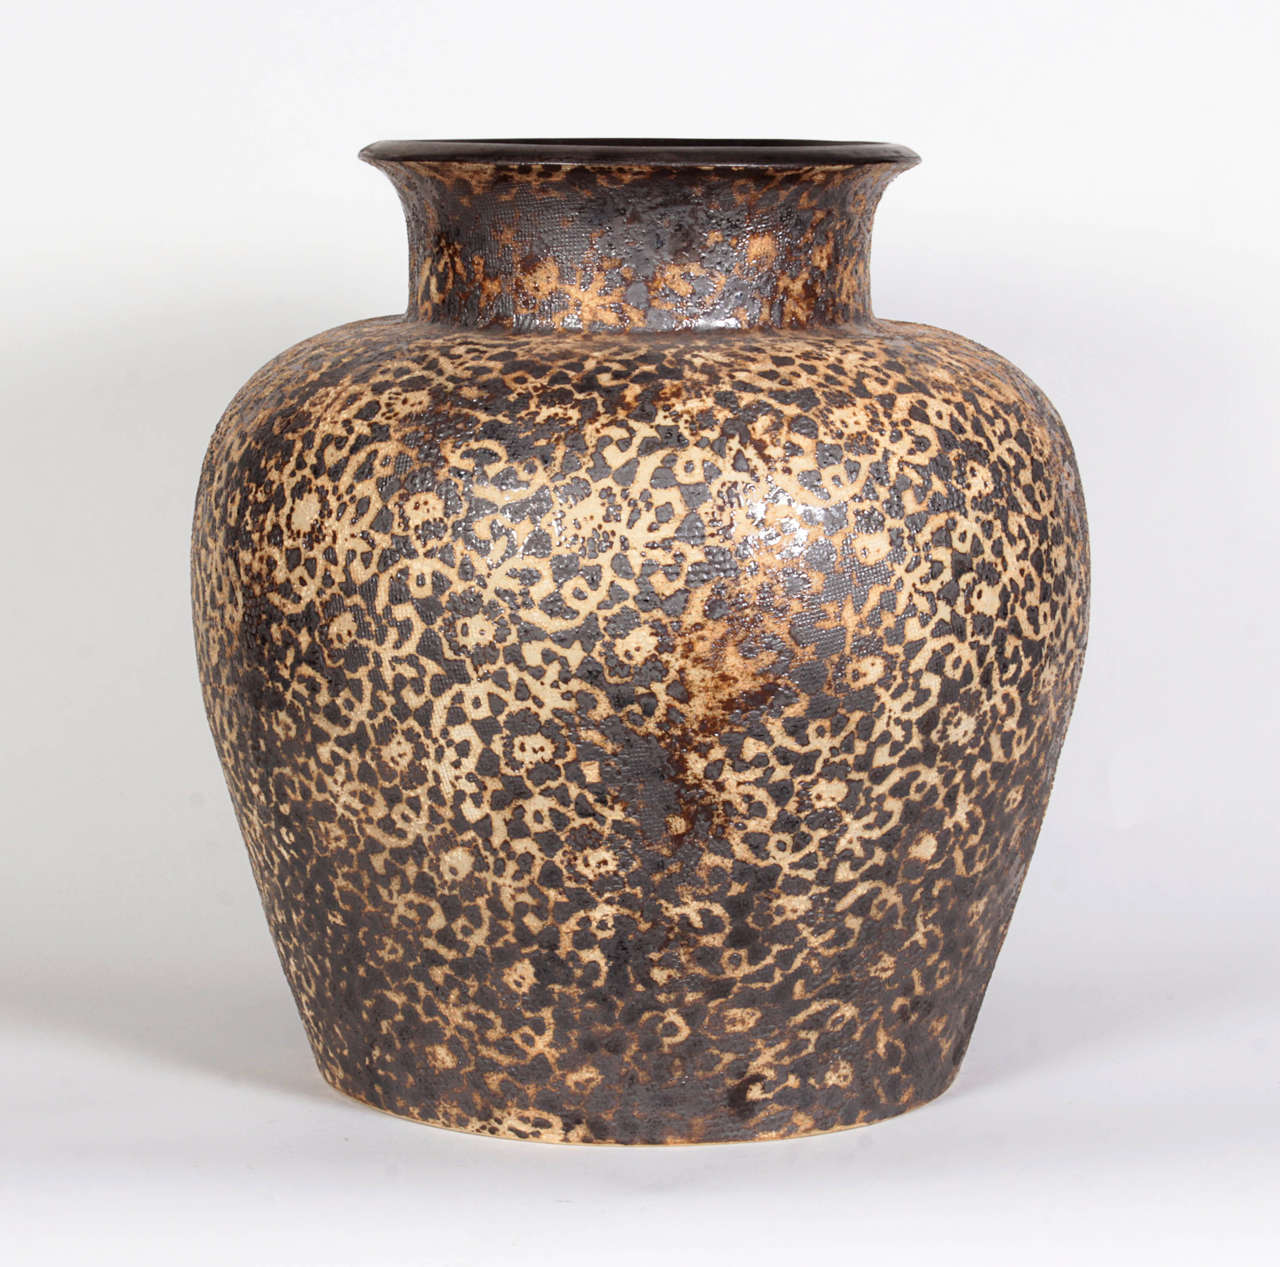 Brown and beige Thai ceramic vase with pebble finish. Curated and personally selected by Donna Karan for her Urban Zen brand.